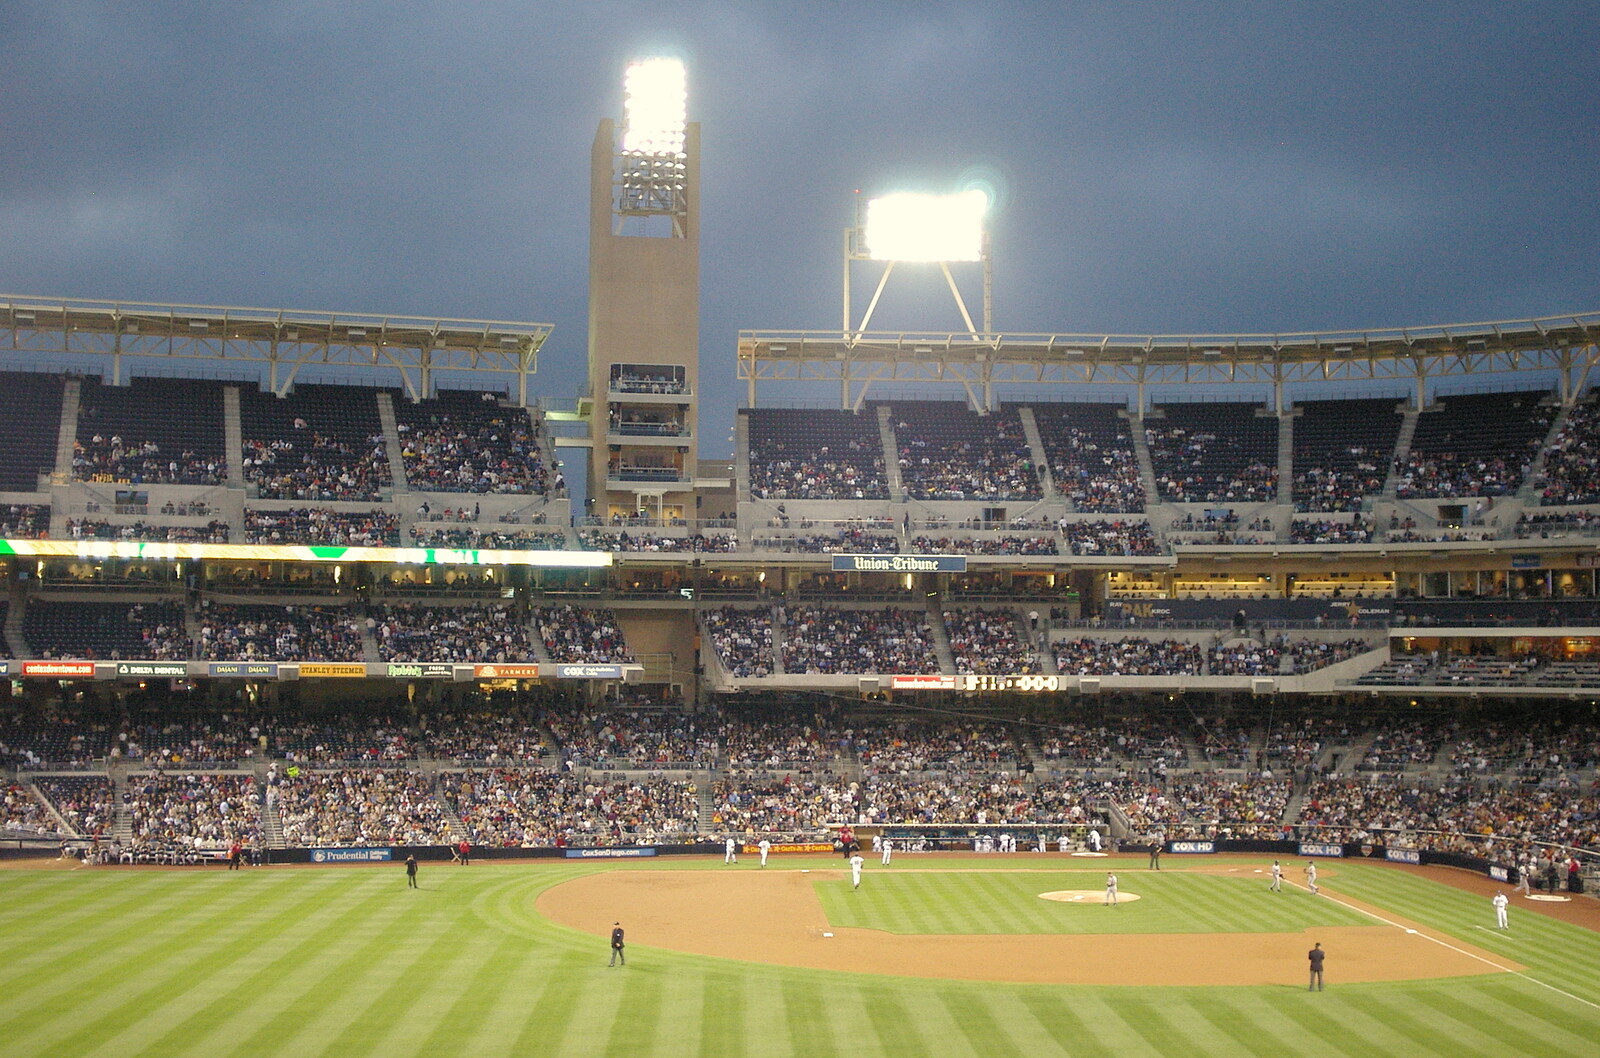 The floodlights are on from The Padres at Petco Park: a Baseball Game, San Diego, California - 31st May 2005